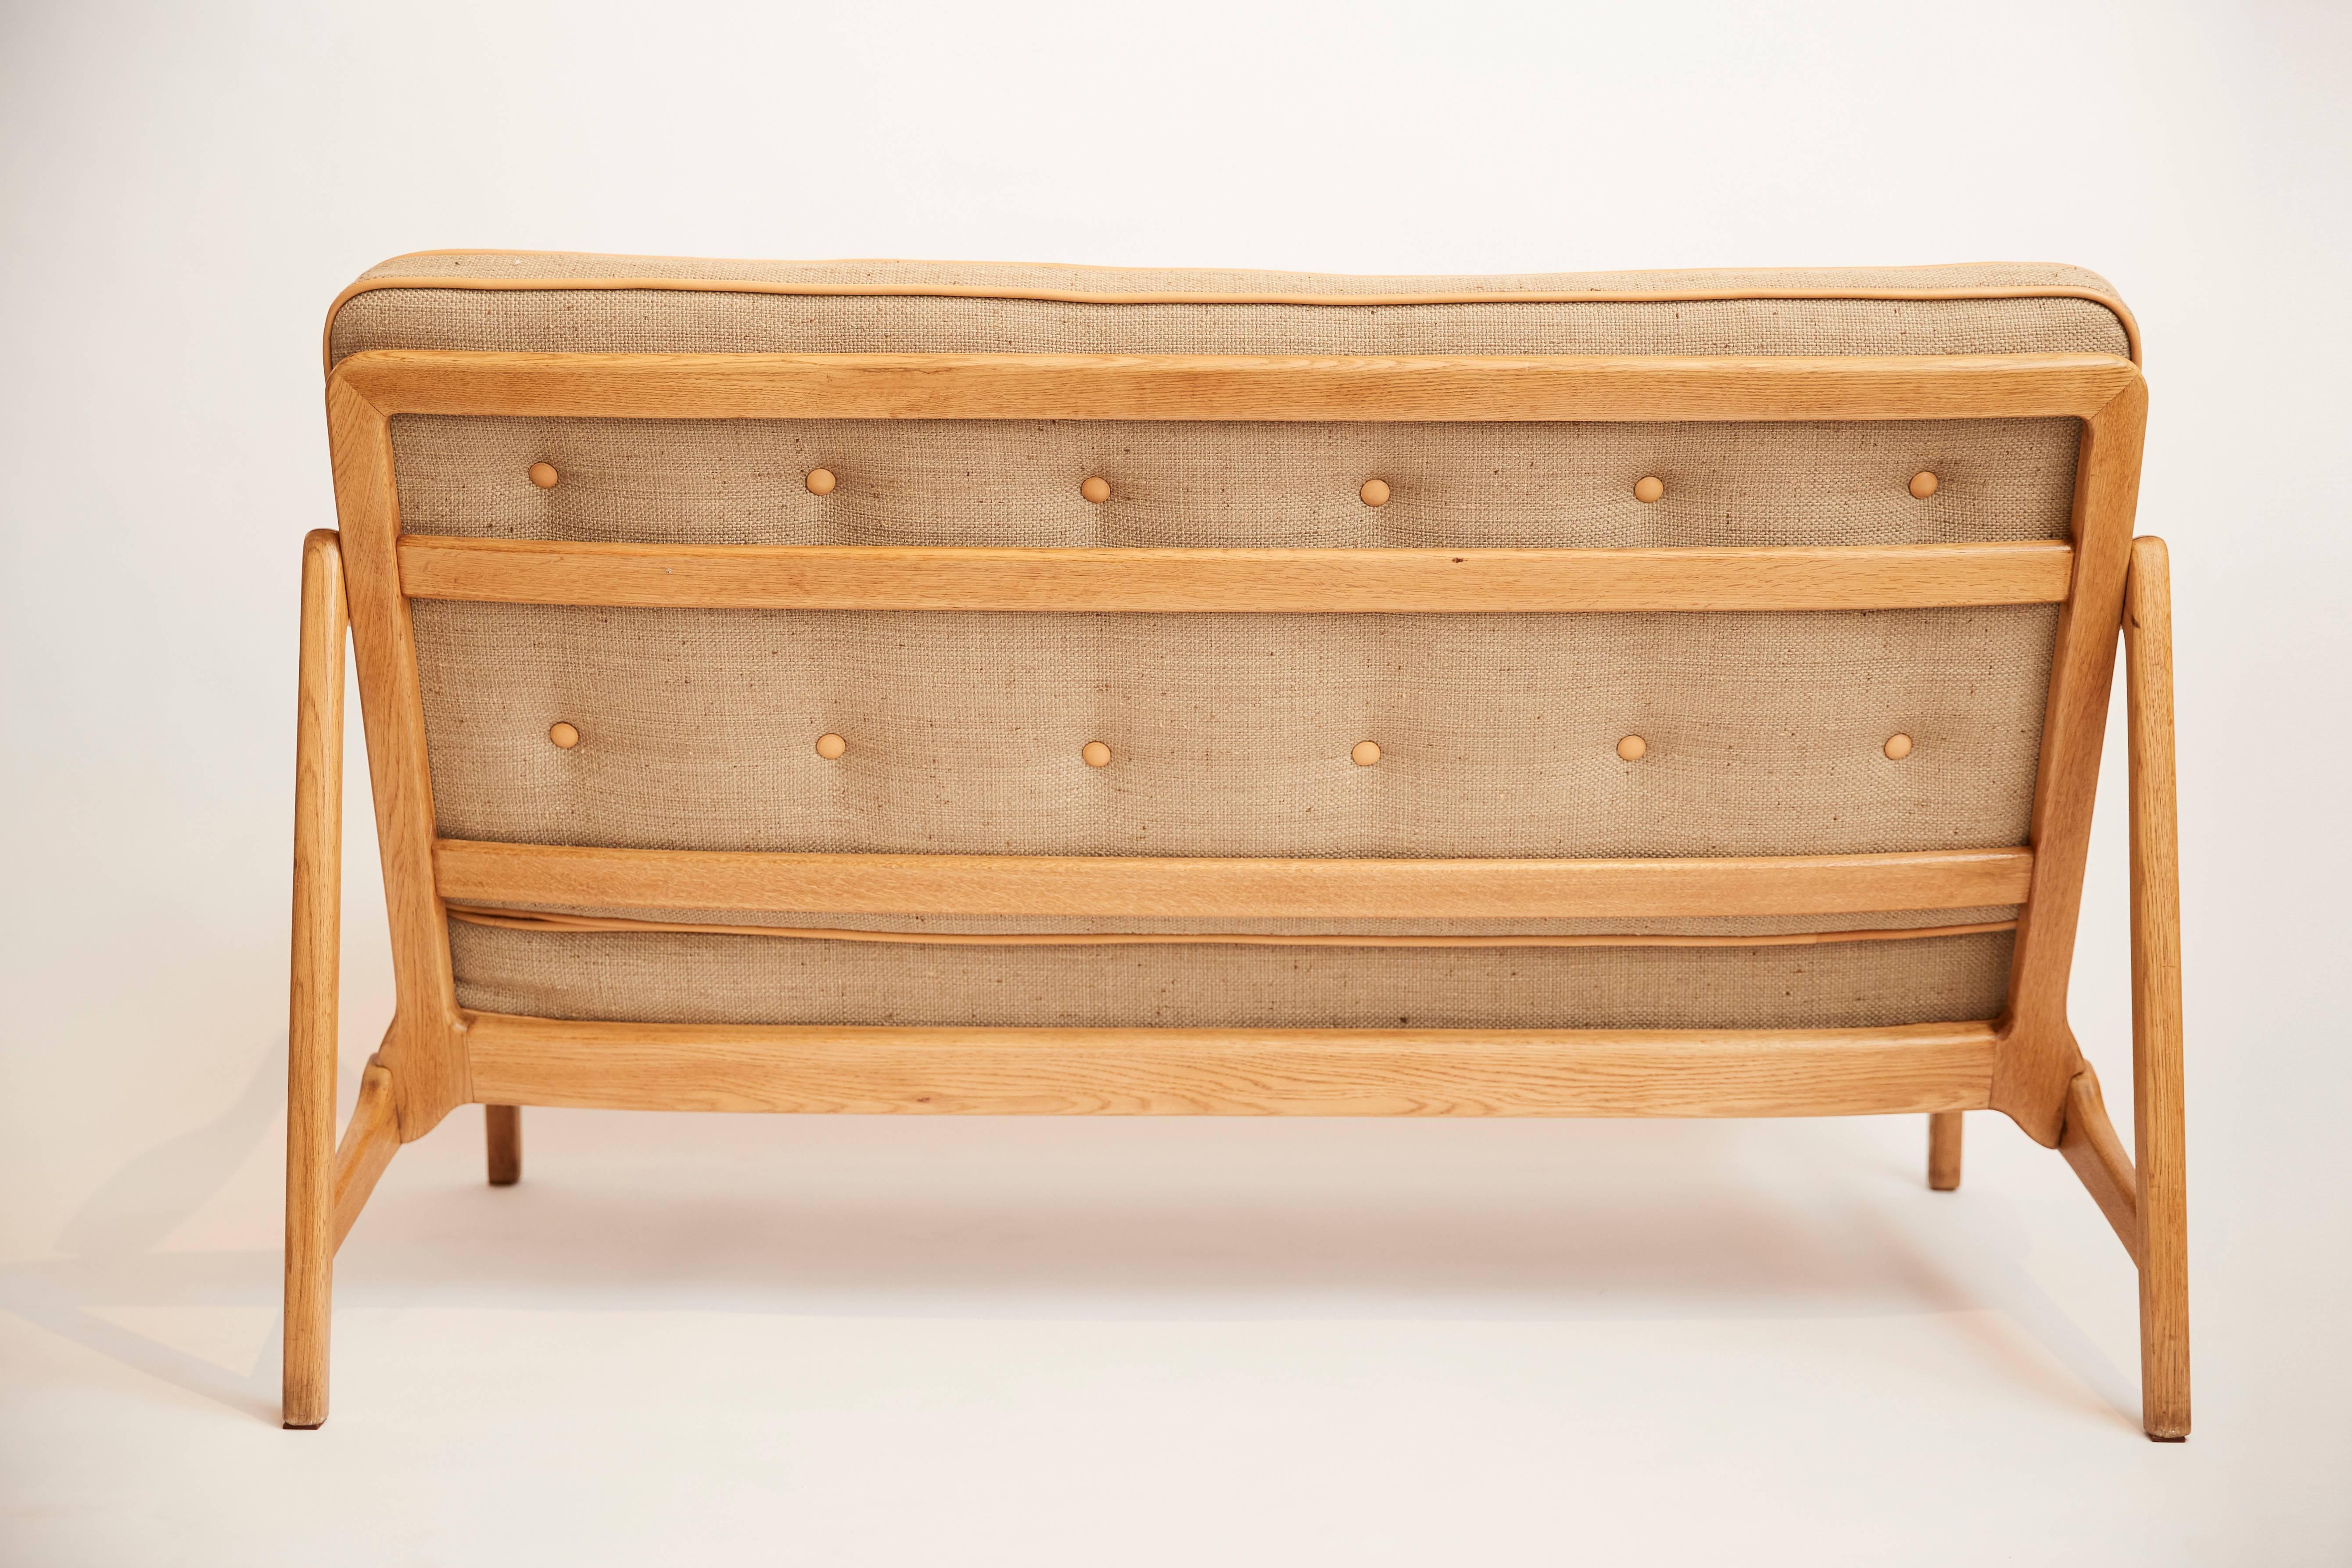 20th Century Sofa by Tove & Edvard Kindt-Larsen, 1950s For Sale